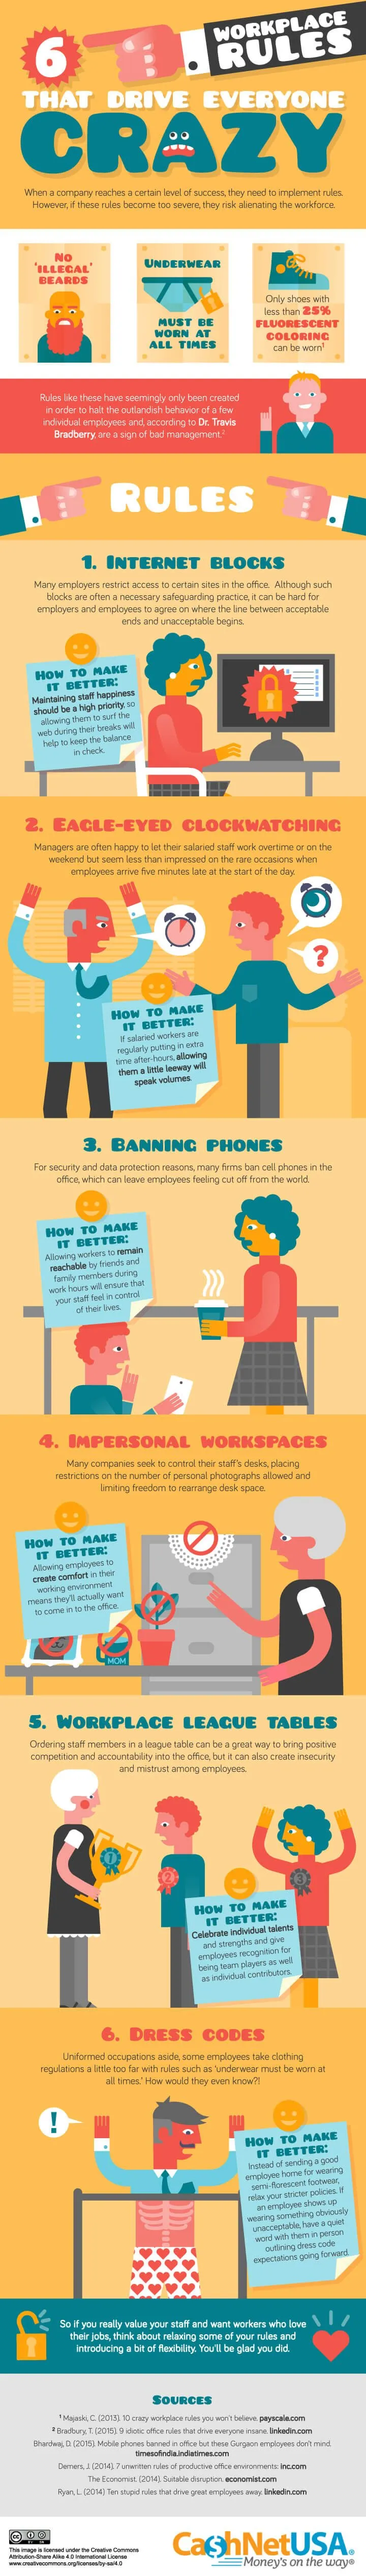 6 Workplace Rules That Drive Everyone Crazy #infographic